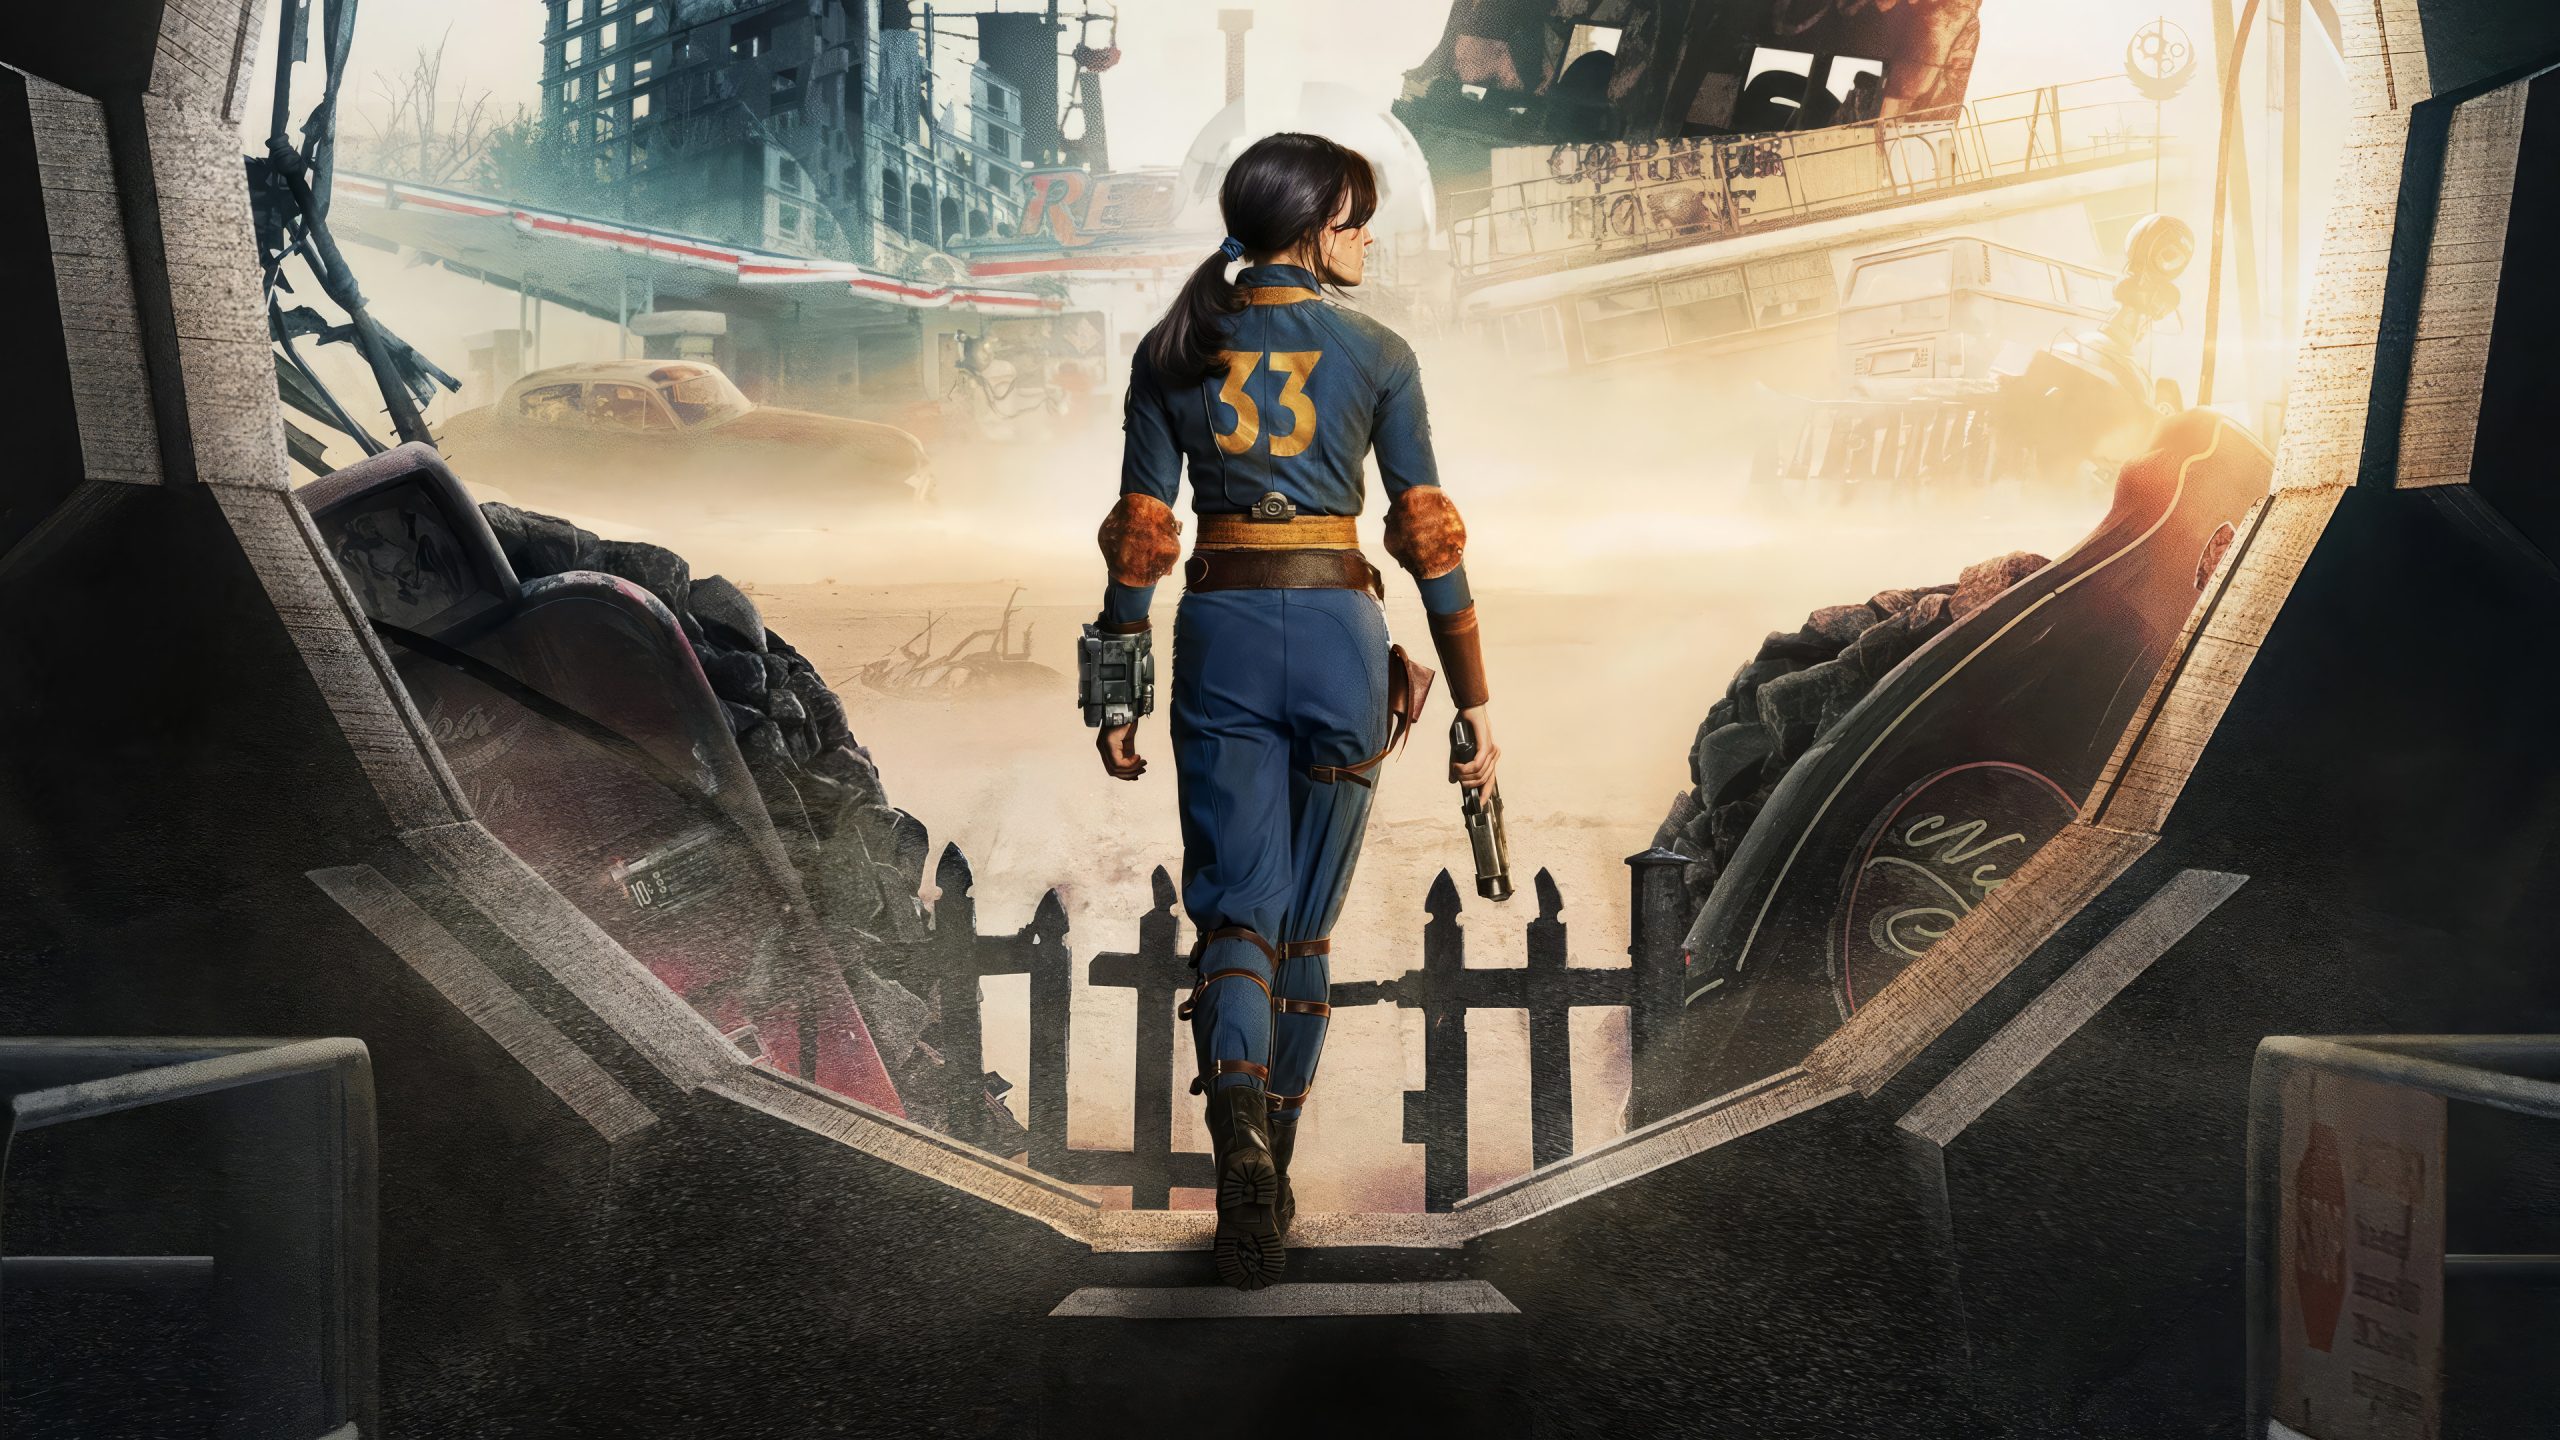 Fallout TV Show is 'Almost Like Fallout 5', Says Producer - Insider Gaming